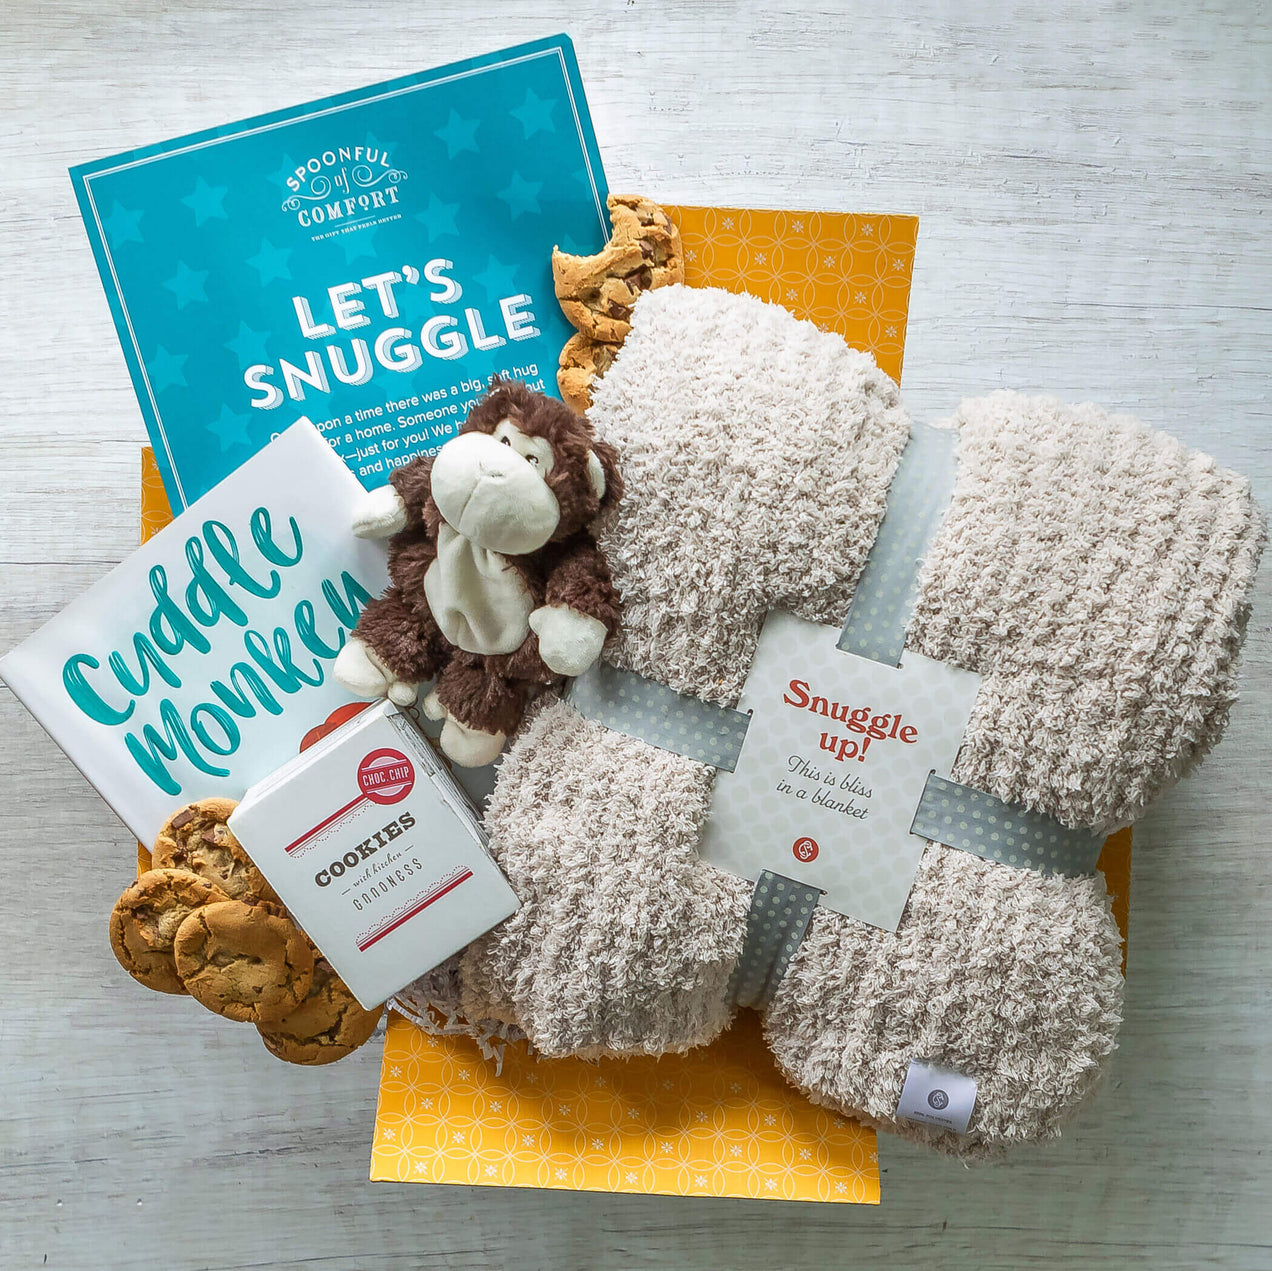 Cookies and Cuddles Care Package. Image shows warmable plush monkey, cuddle monkey book words by Blake Liliane Hellman Pictures by Chad Otis. Surrounded by cookies and insert that says "let's Snuggle"